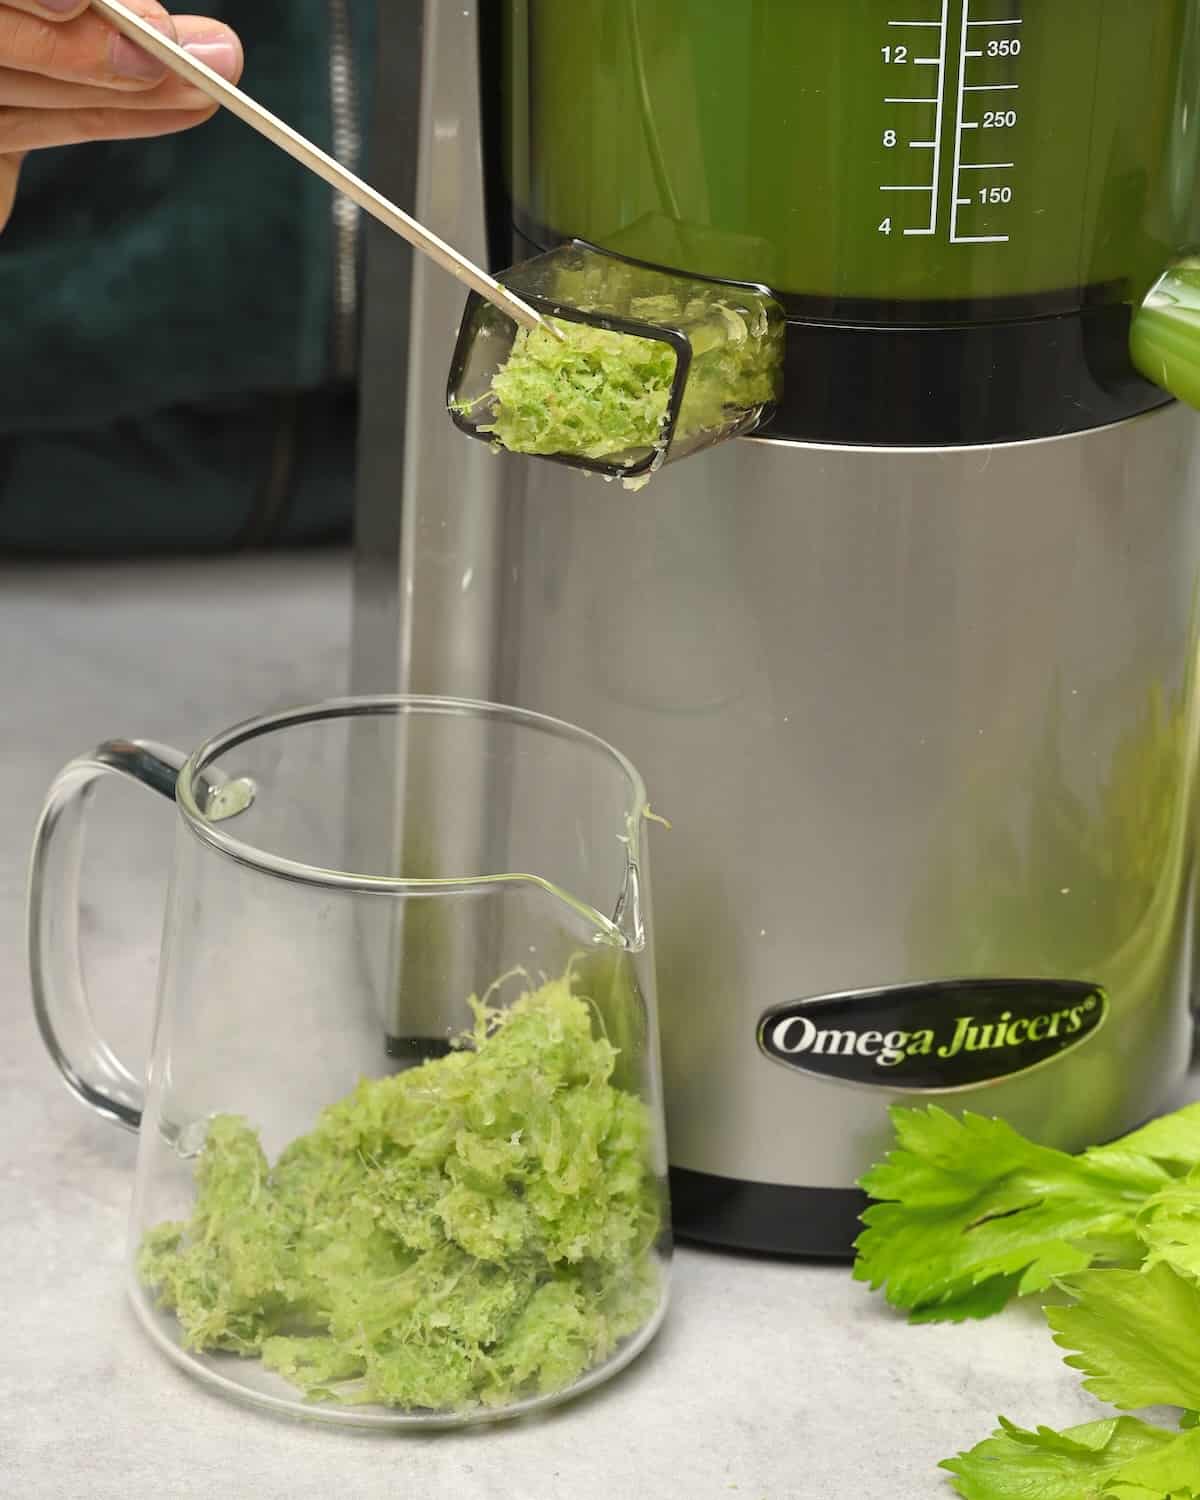 Celery fiber being removed from a juicer